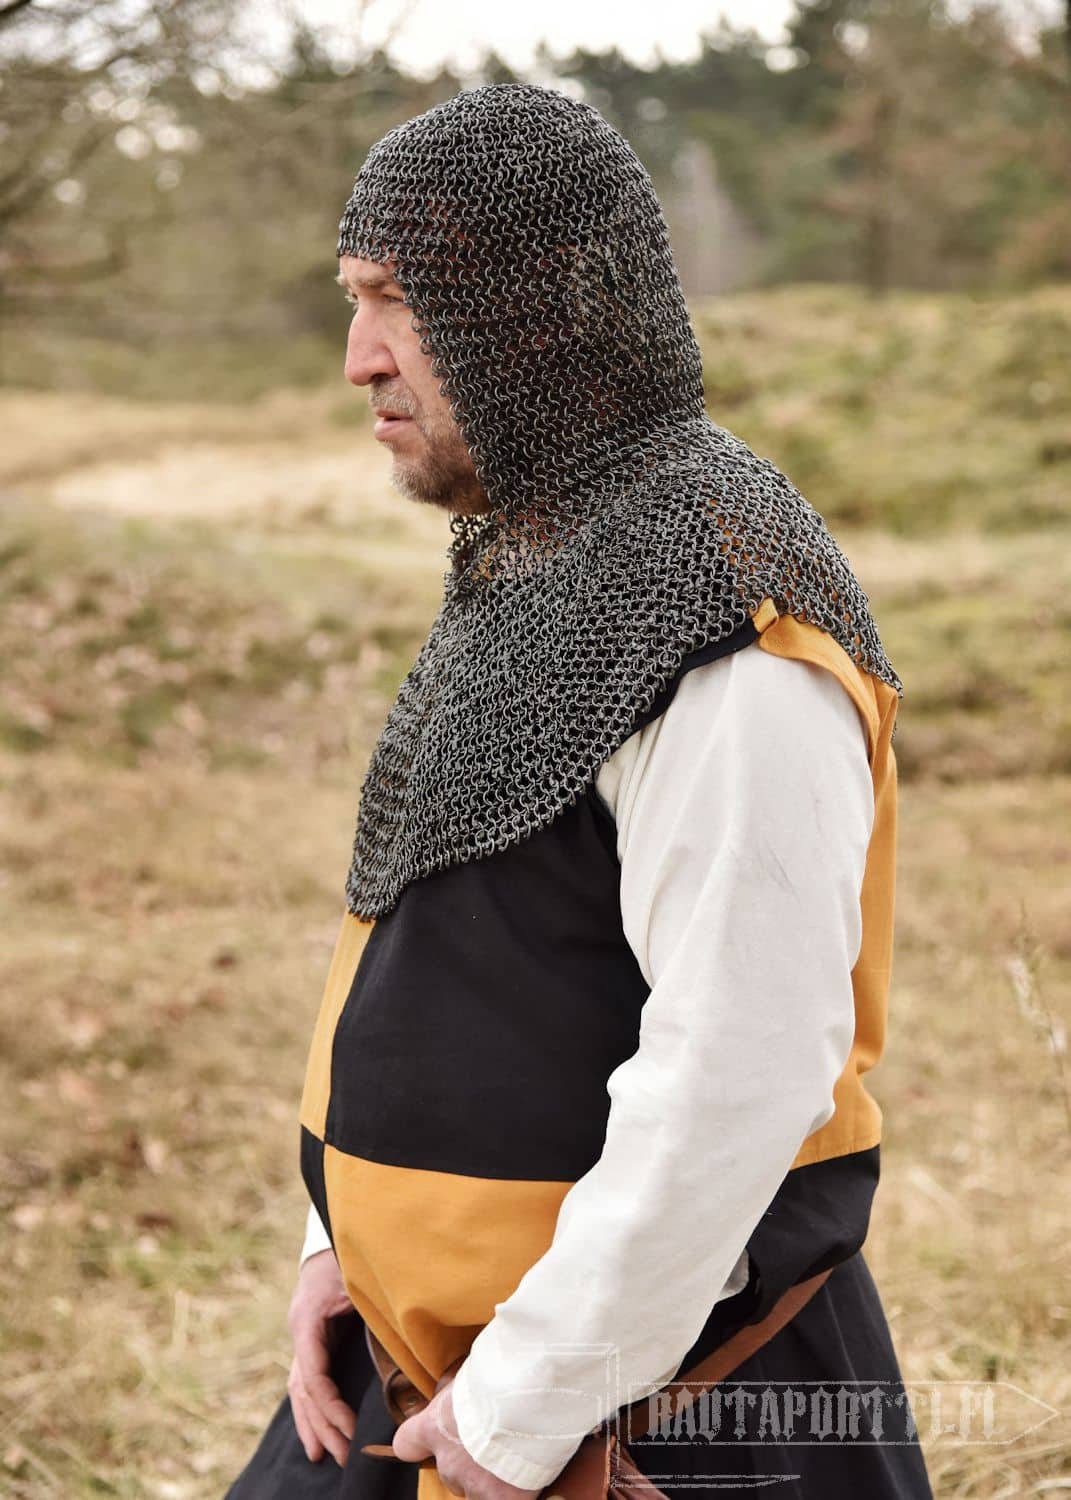 Medieval Inspired Chainmail Coif Armor Functional Replica